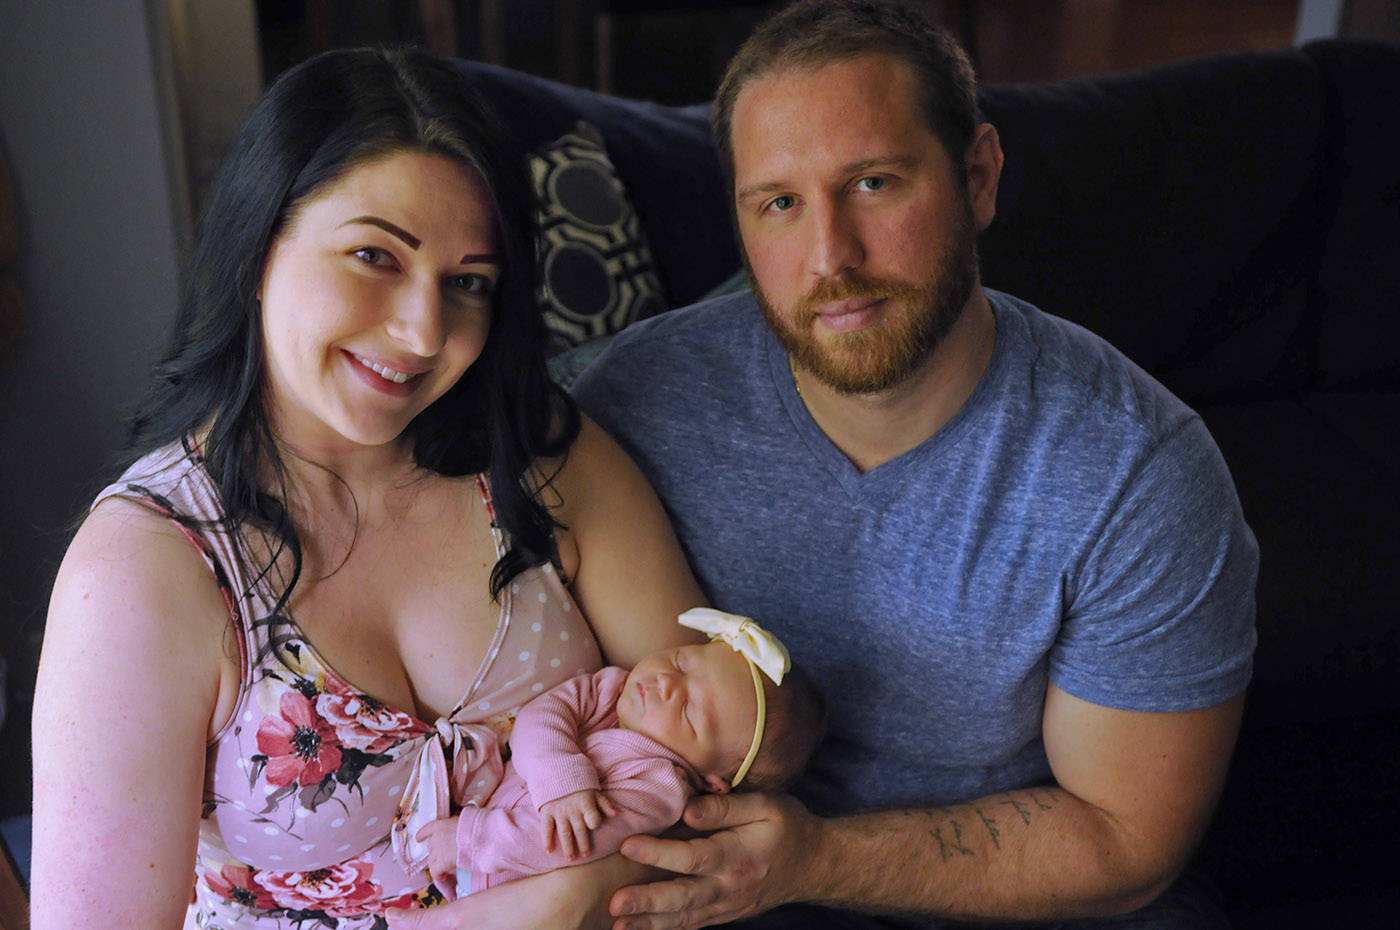 Raeya Evie Duncan was the 100th baby born at Chilliwack General Hospital for the month of May. She is seen here with her parents Alysha Williams and Andrew Duncan on June 12, 2021. (Jenna Hauck/ Chilliwack Progress)